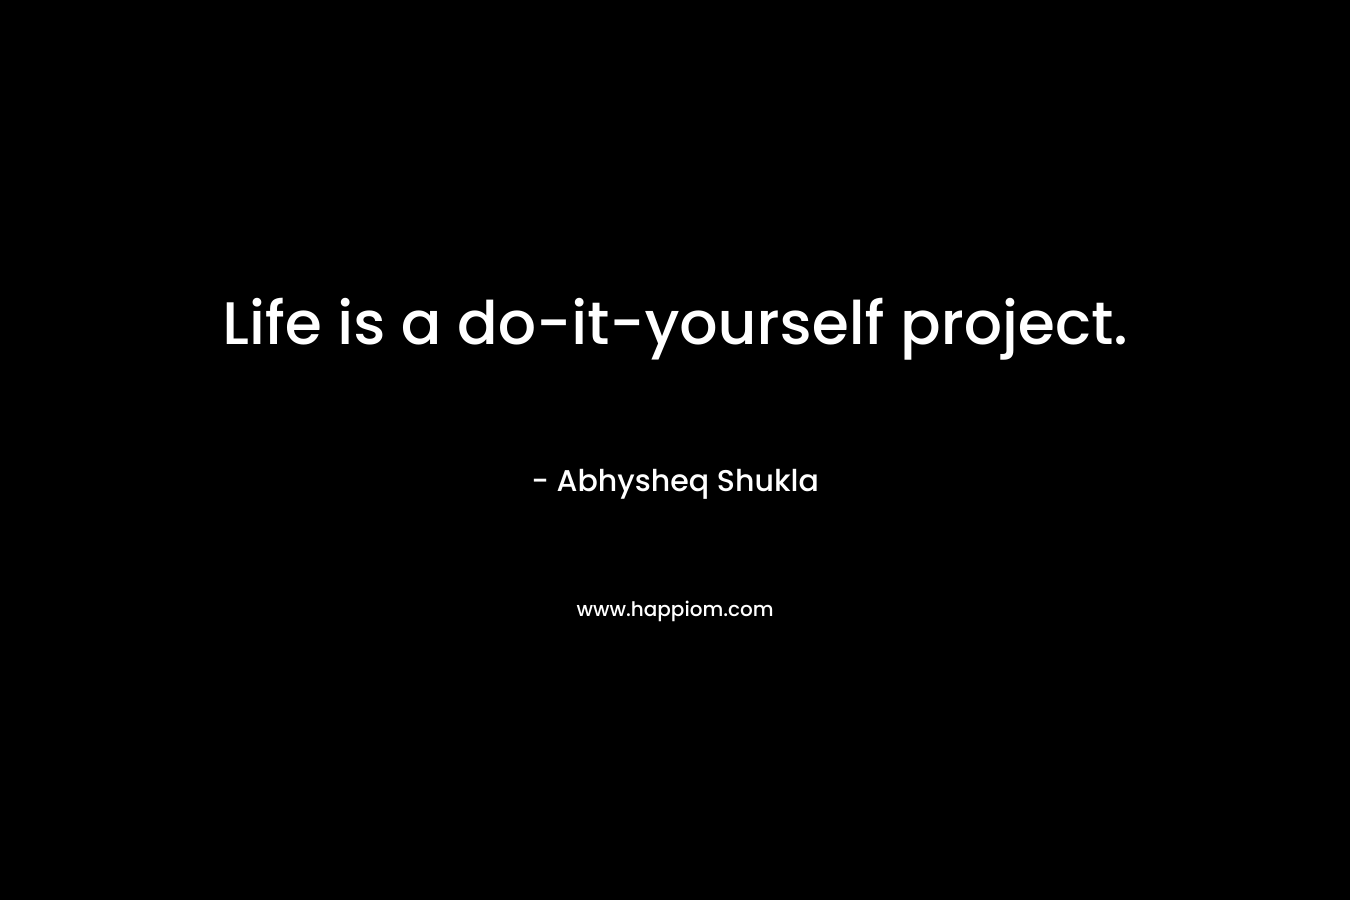 Life is a do-it-yourself project. – Abhysheq Shukla